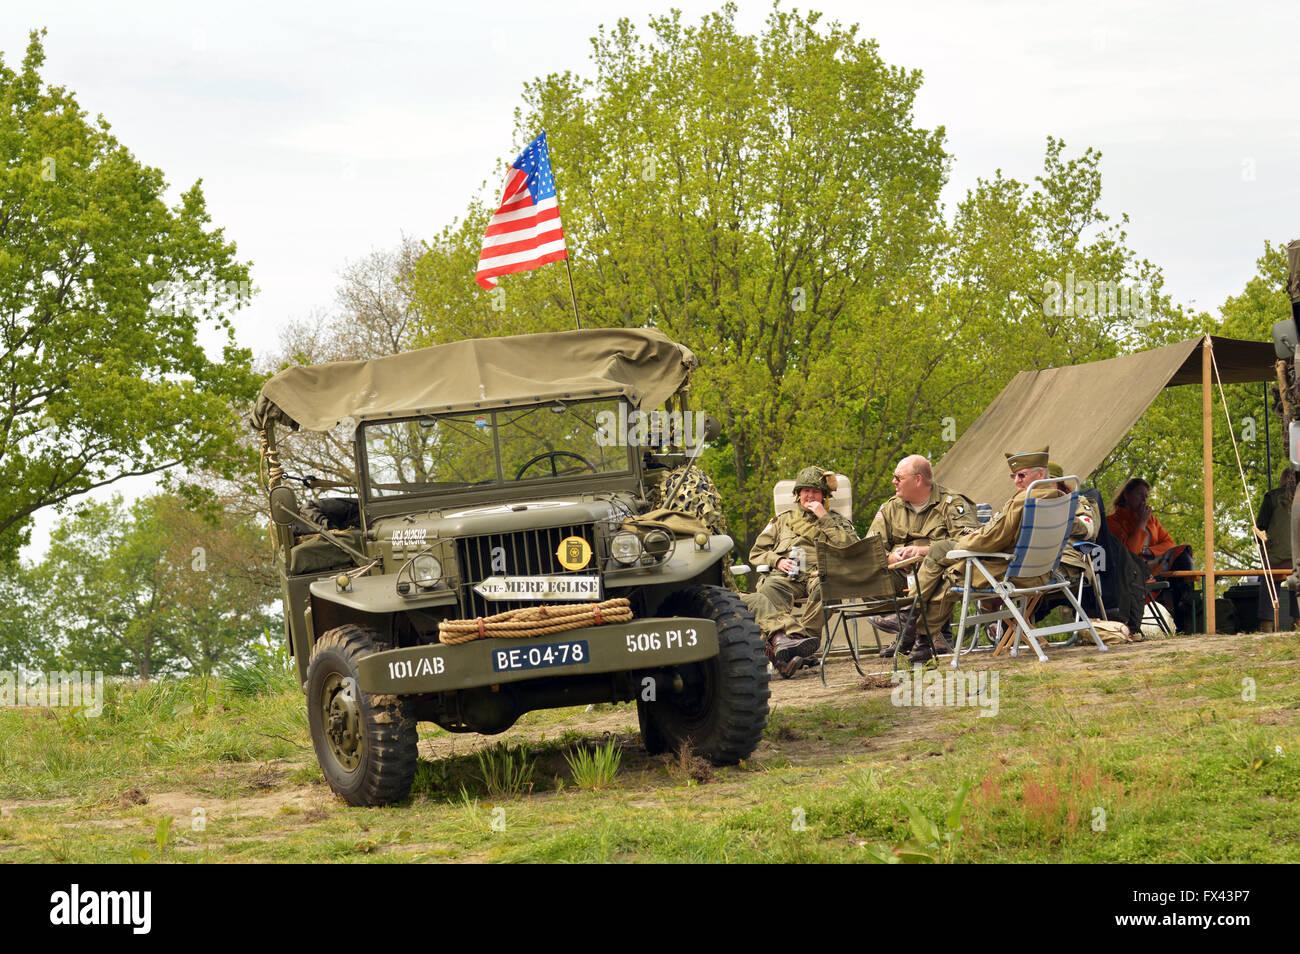 US Army Jeep. Restored Classic historic WWII military vehicle at a military event on Liberation day in The Netherlands. Stock Photo